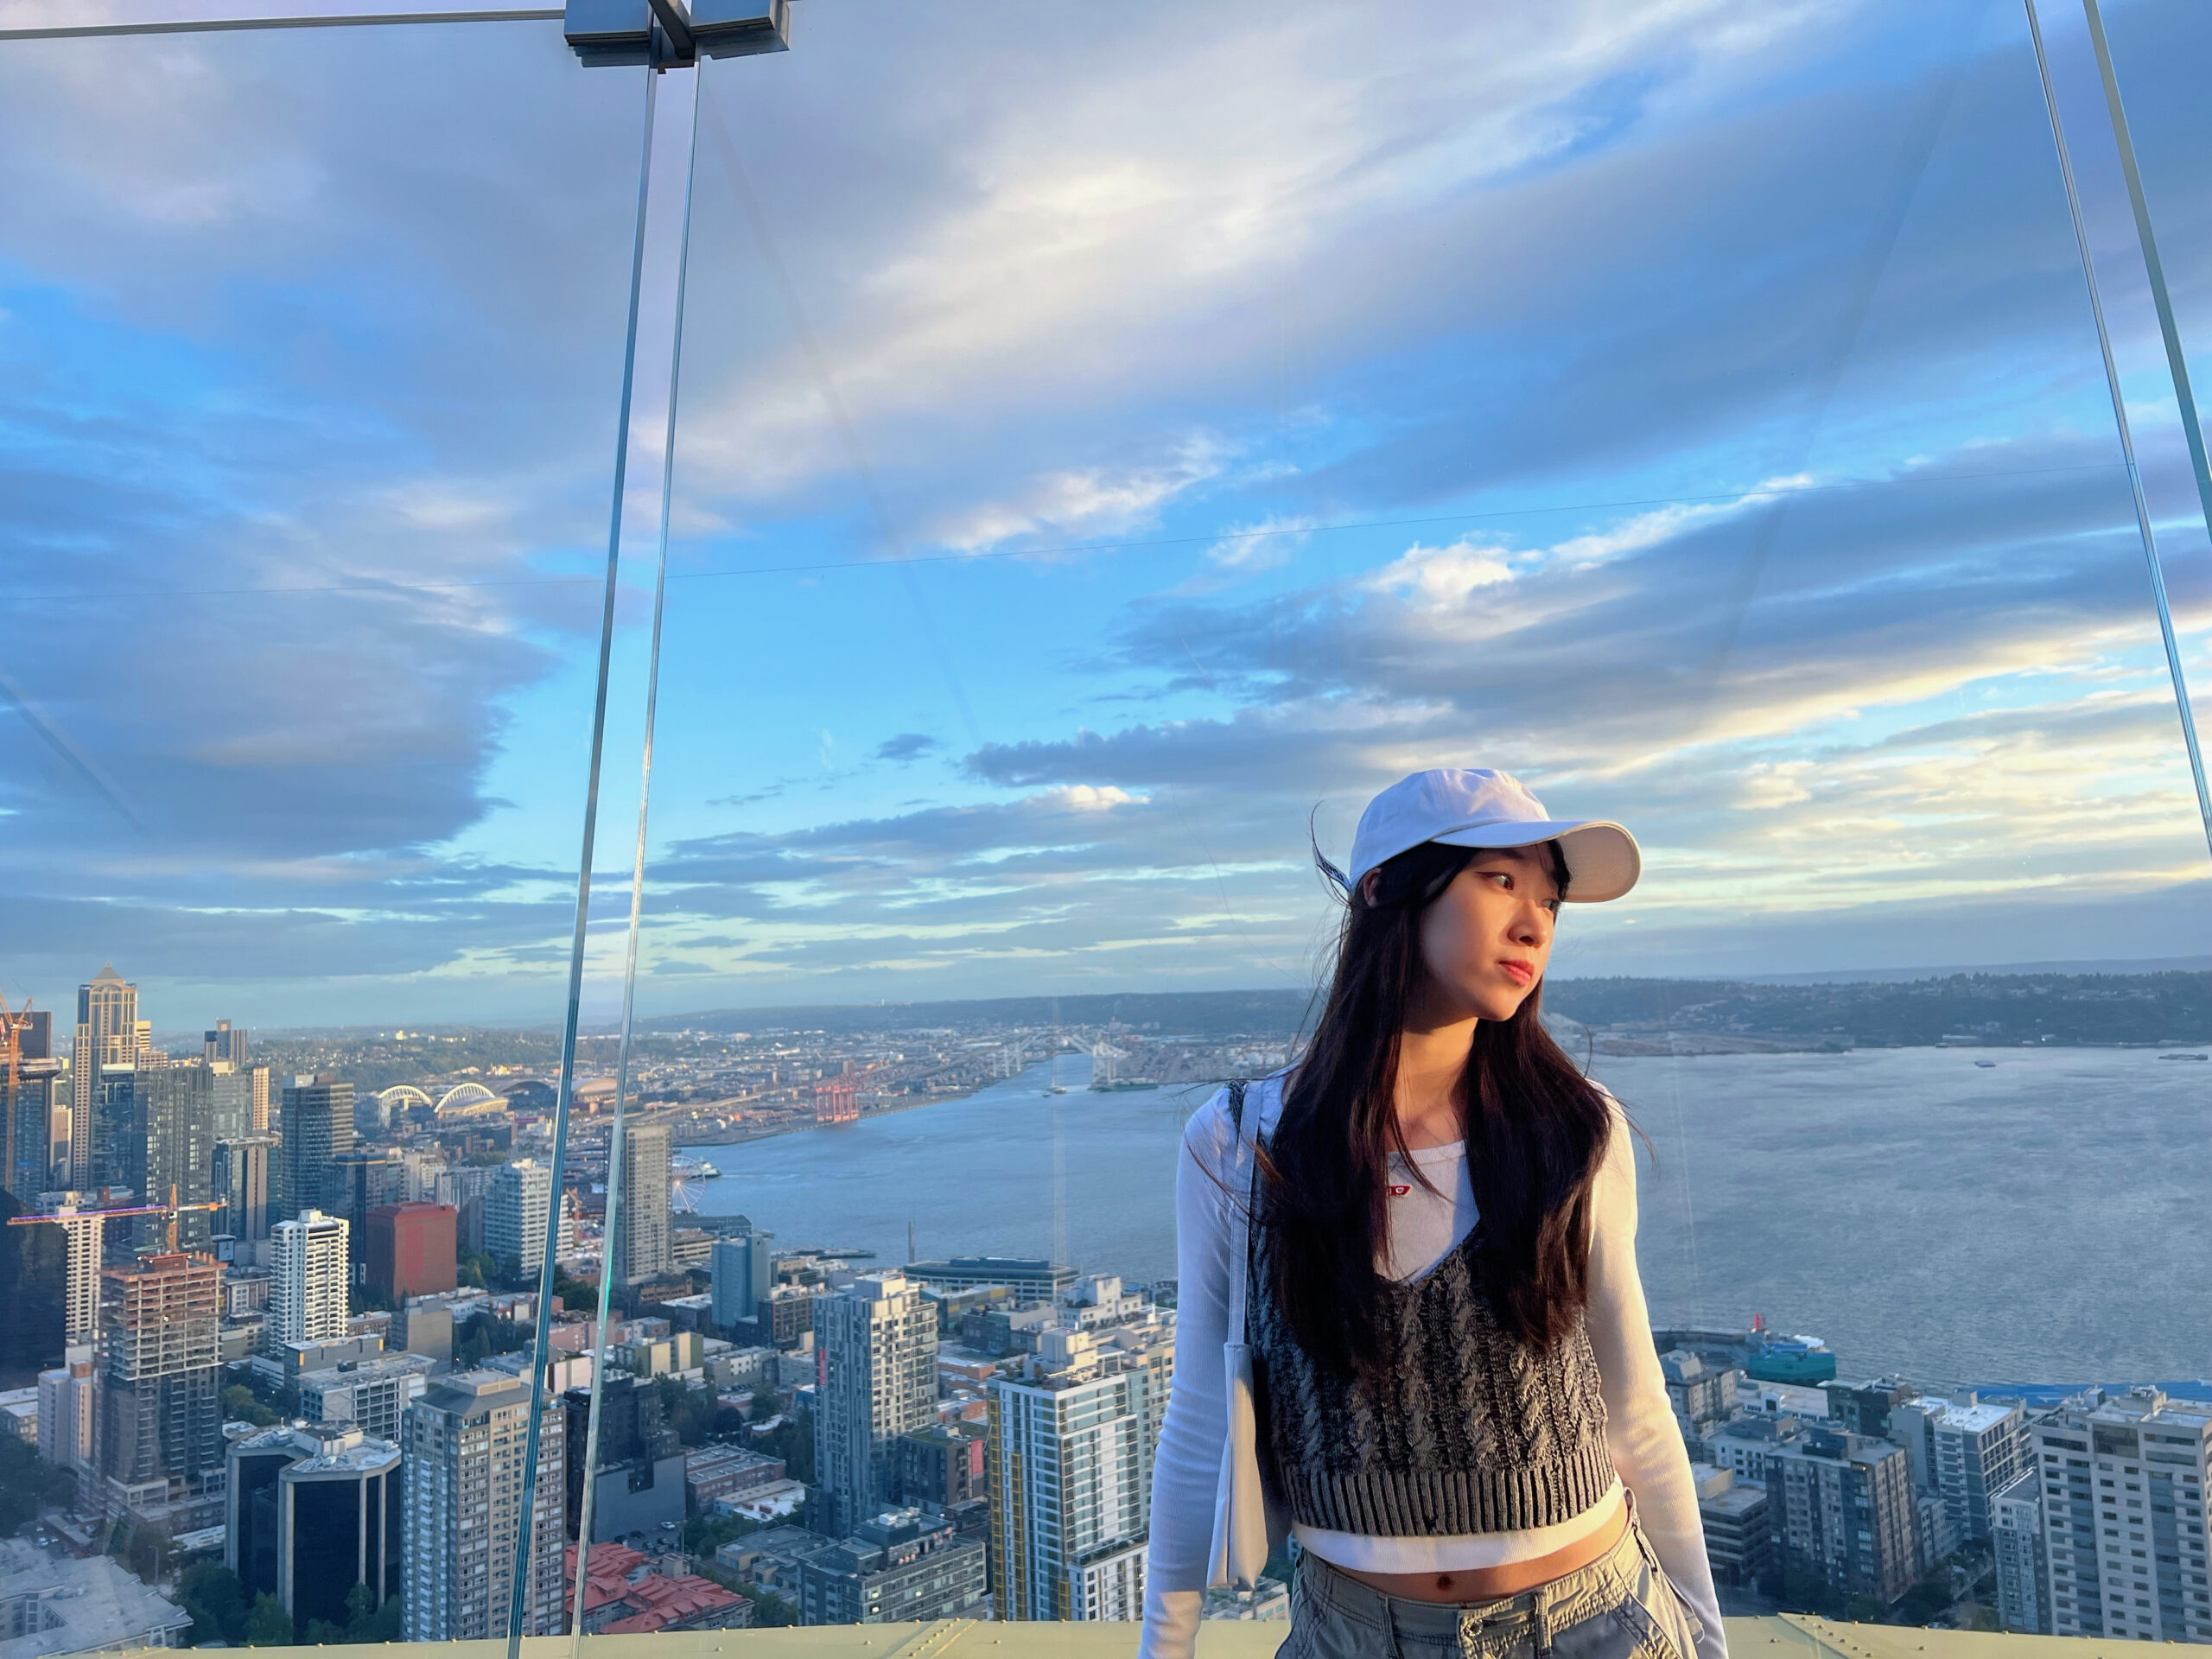 A Chinese woman in her 20s, Angela, looks off to one side with the skyline of Seattle behind her